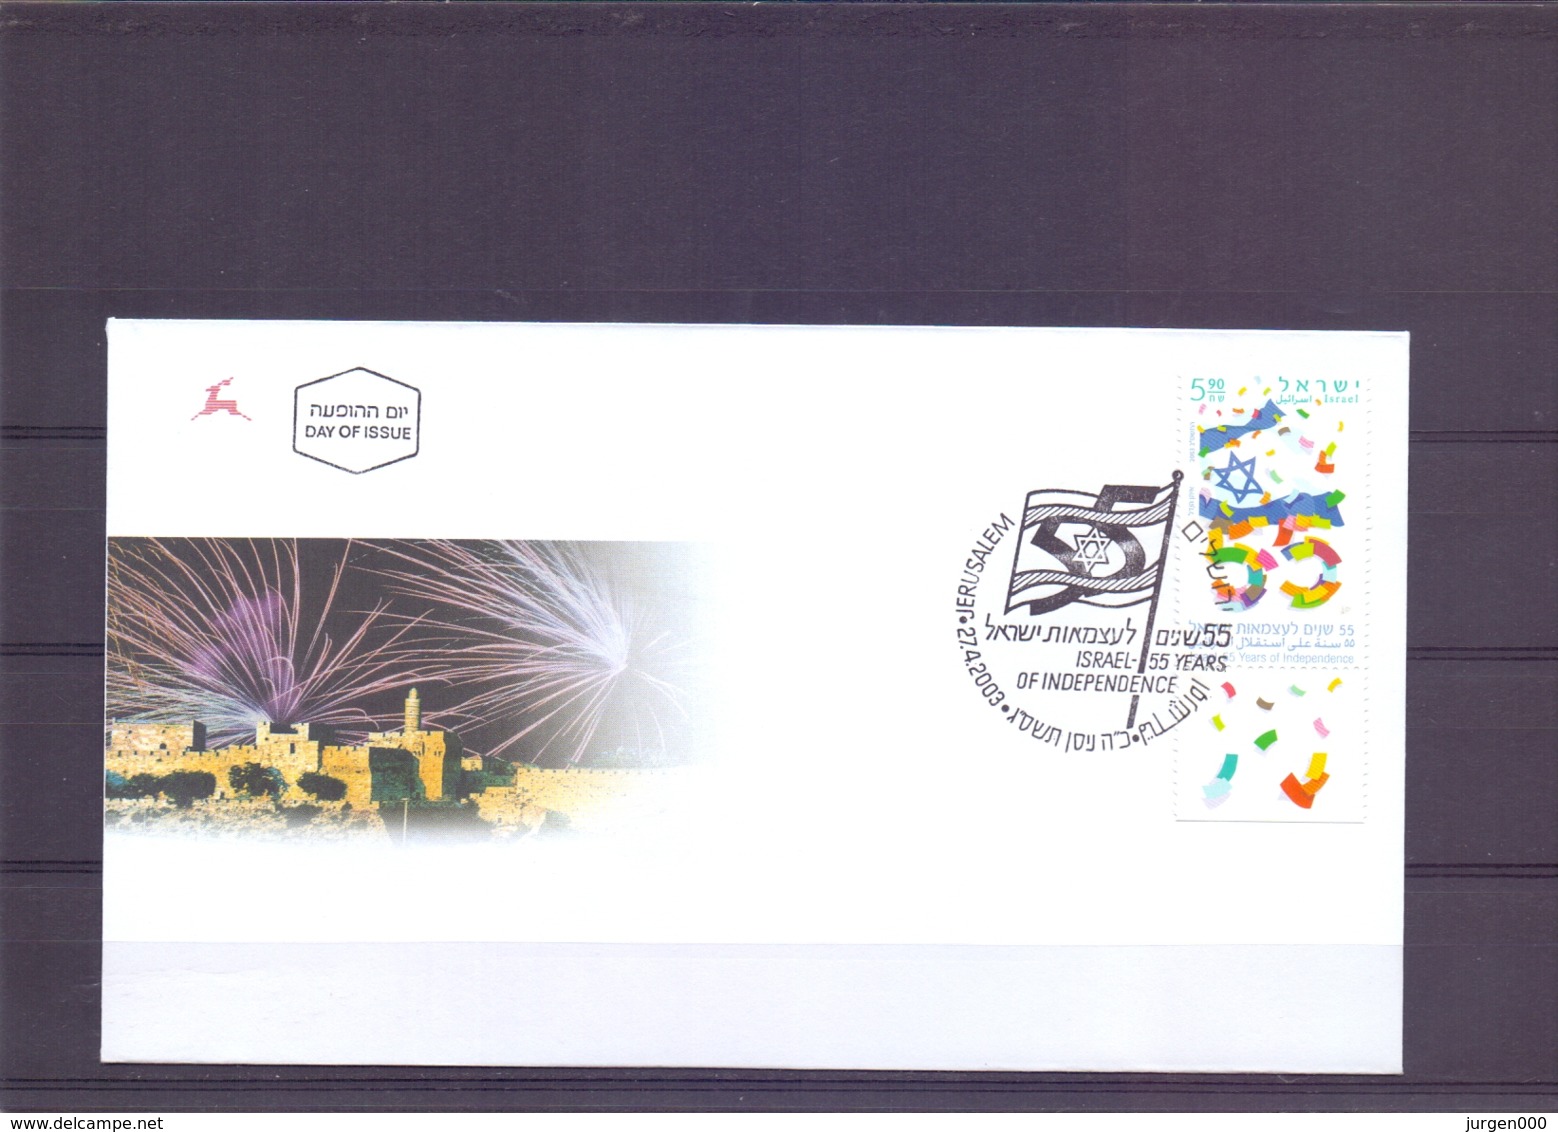 Israel - FDC - 55 Years Independence -  Michel 1723 - Jerusalem 27/4/2003  (RM14787) - Covers & Documents